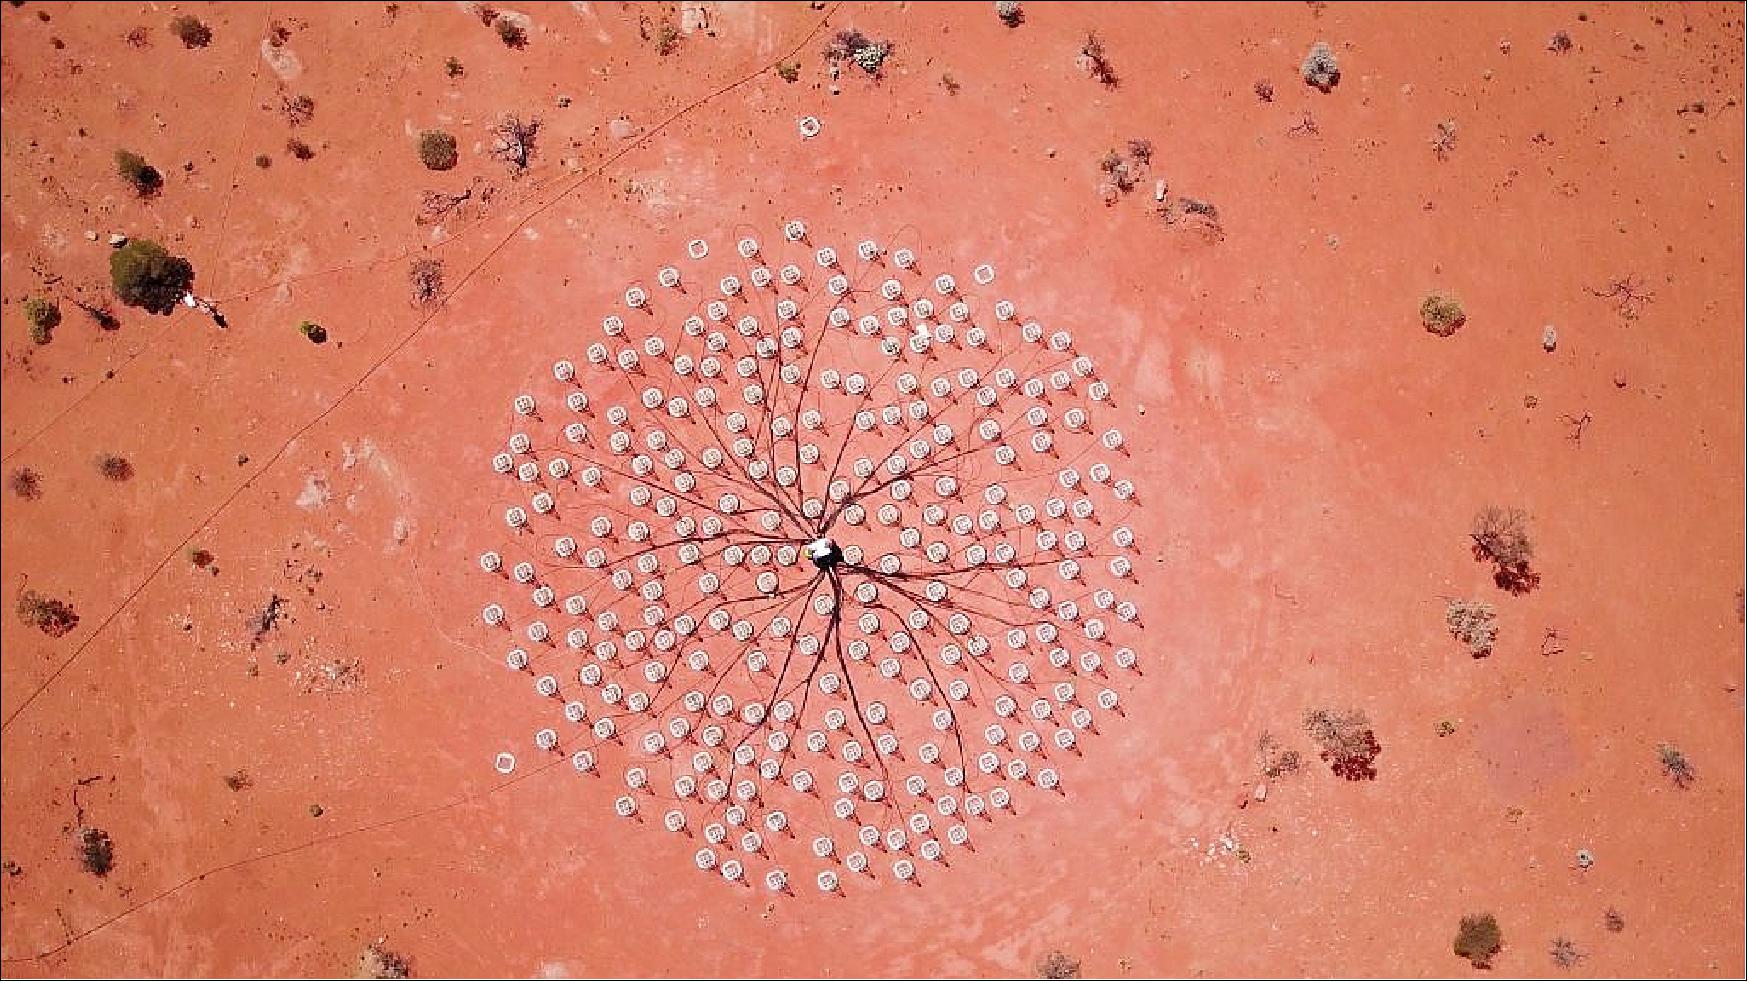 Figure 54: A full station of 256 antennas at CSIRO’s Murchison Radio-astronomy Observatory in outback Western Australia. The demonstrator is used to help test and finalize the design of the low frequency antennas for the SKA (image credit: ICRAR/Curtin University)